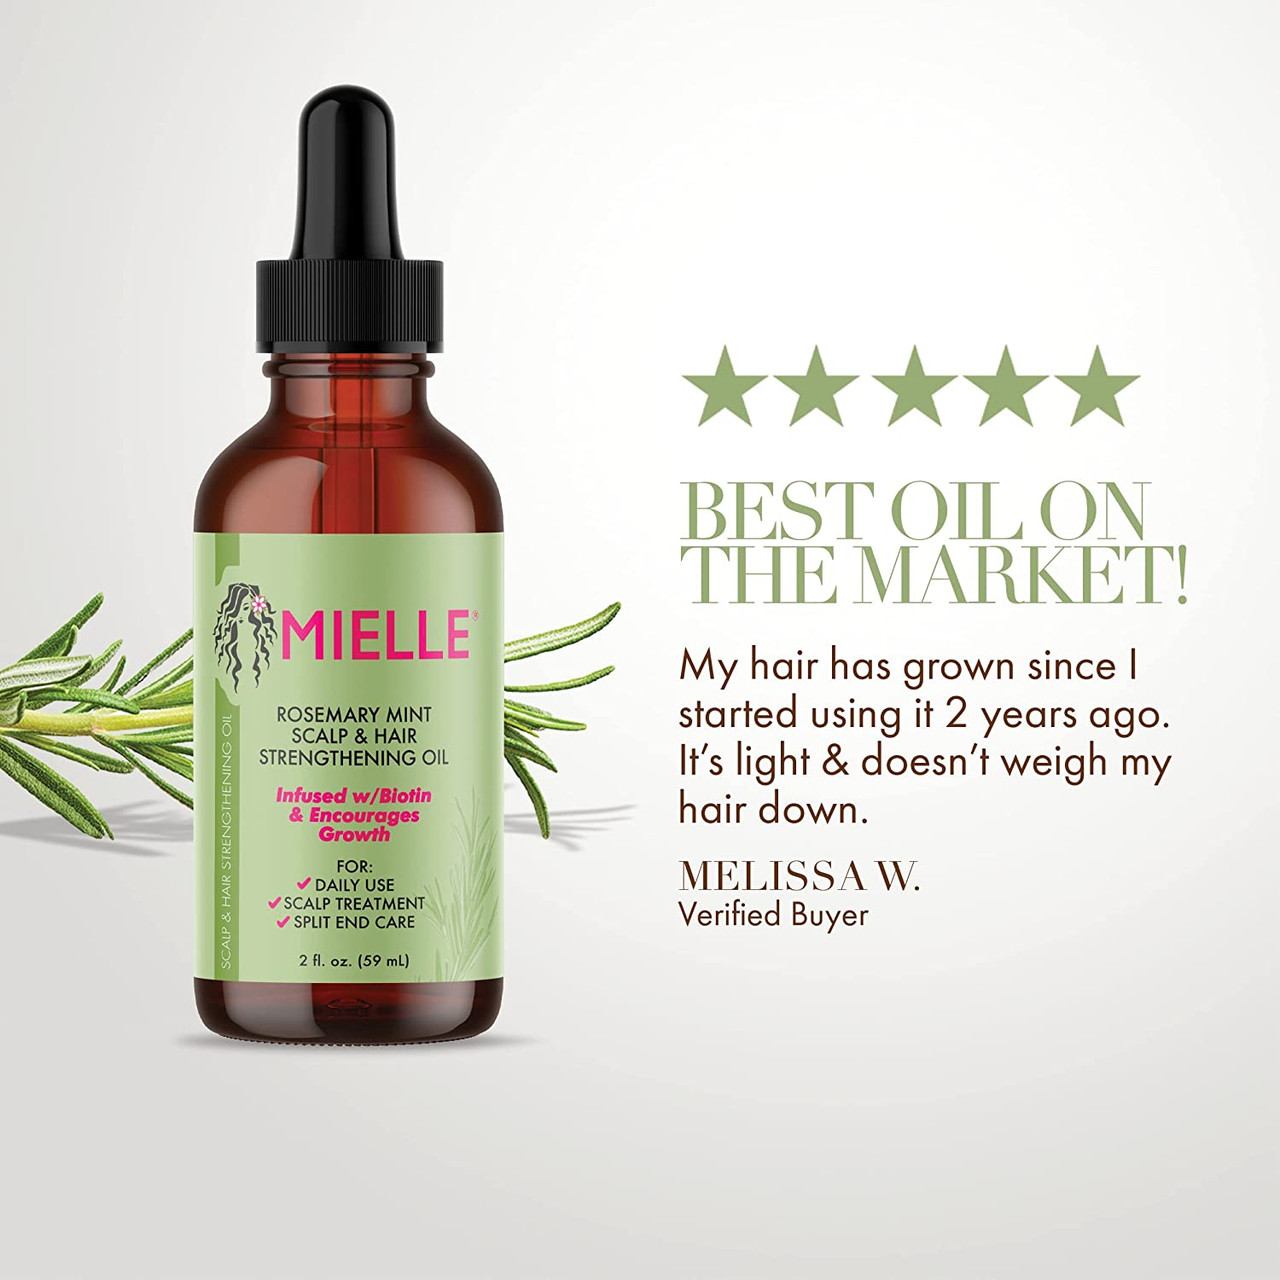 Mielle Organics Rosemary Mint Growth Oil 2 oz, Strengthening Hair Masque 12  oz, and Strengthening Edge Gel 2 oz,For stronger and healthier hair